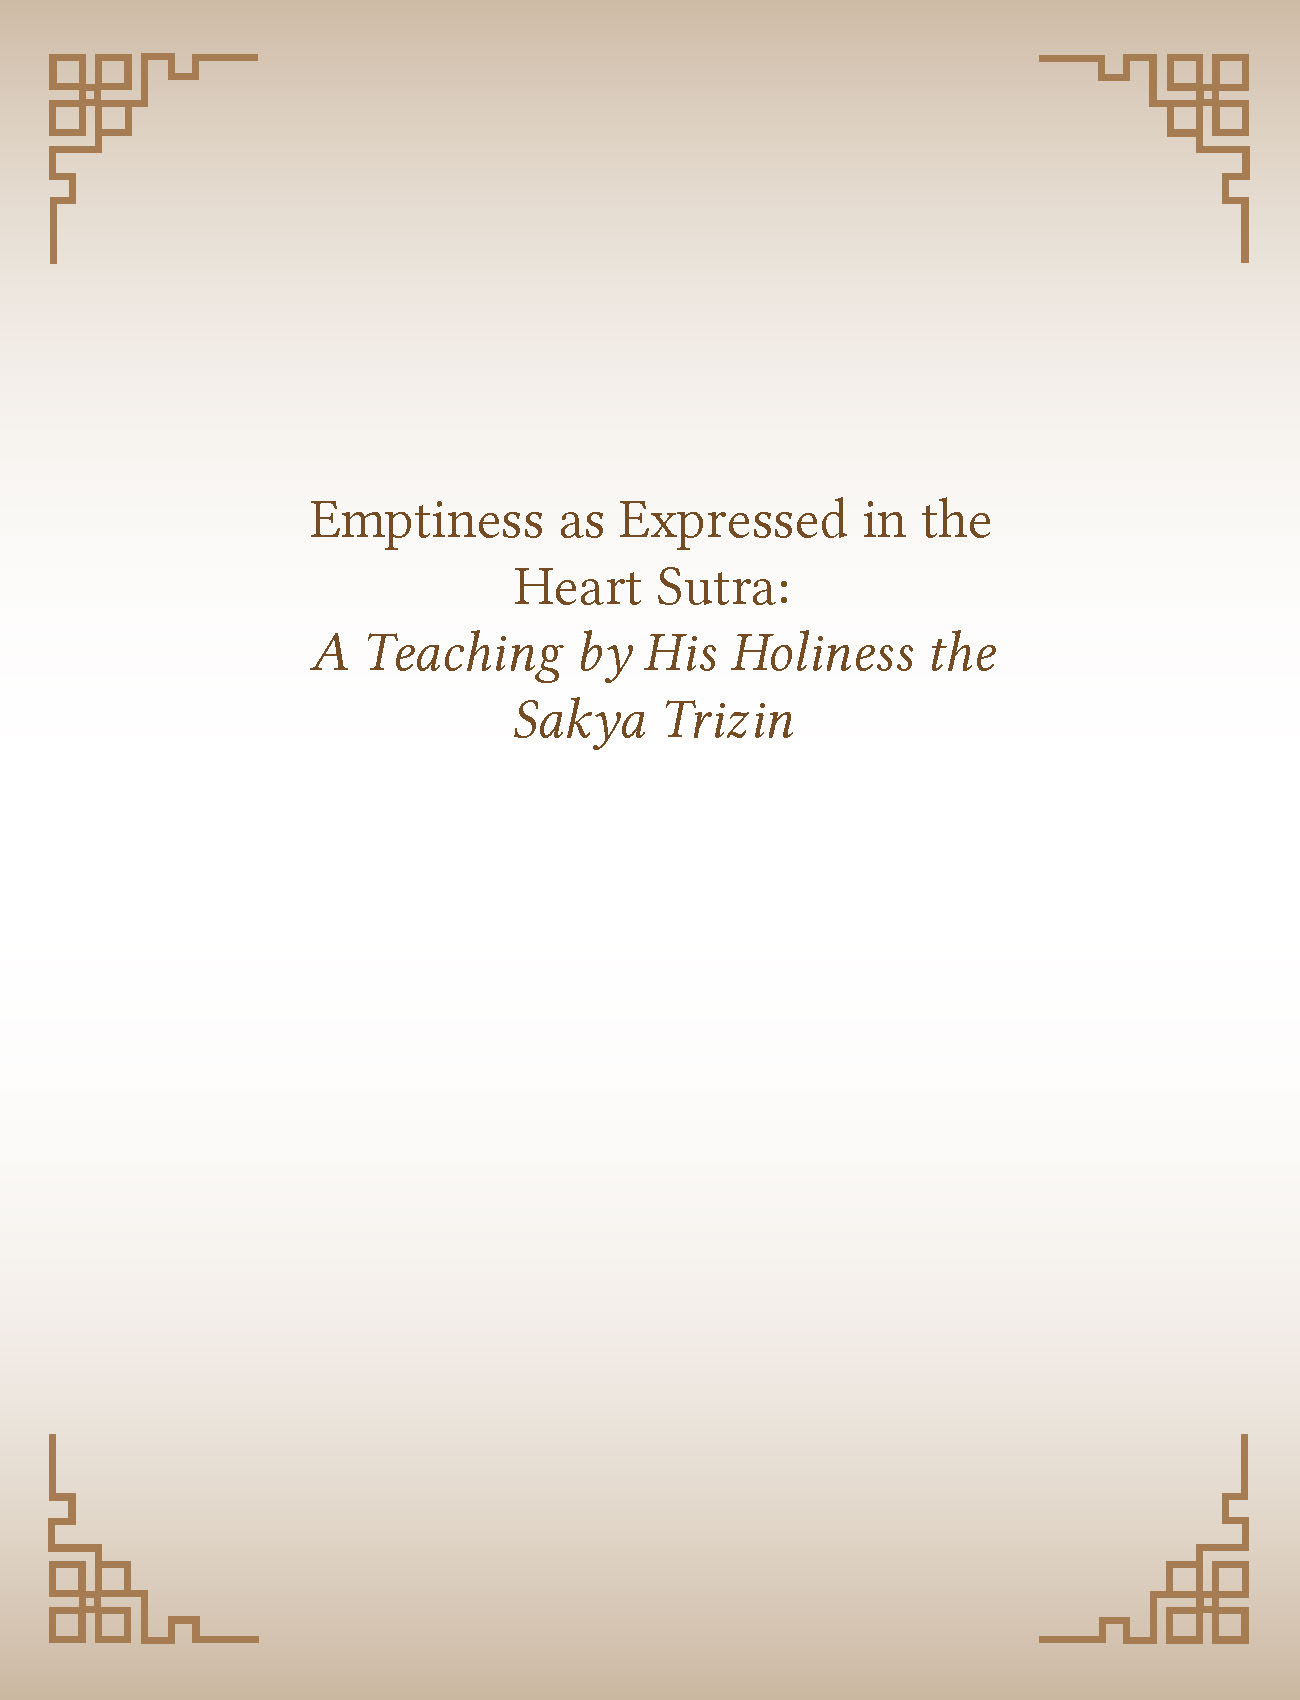 Emptiness as Expressed in the Heart Sutra